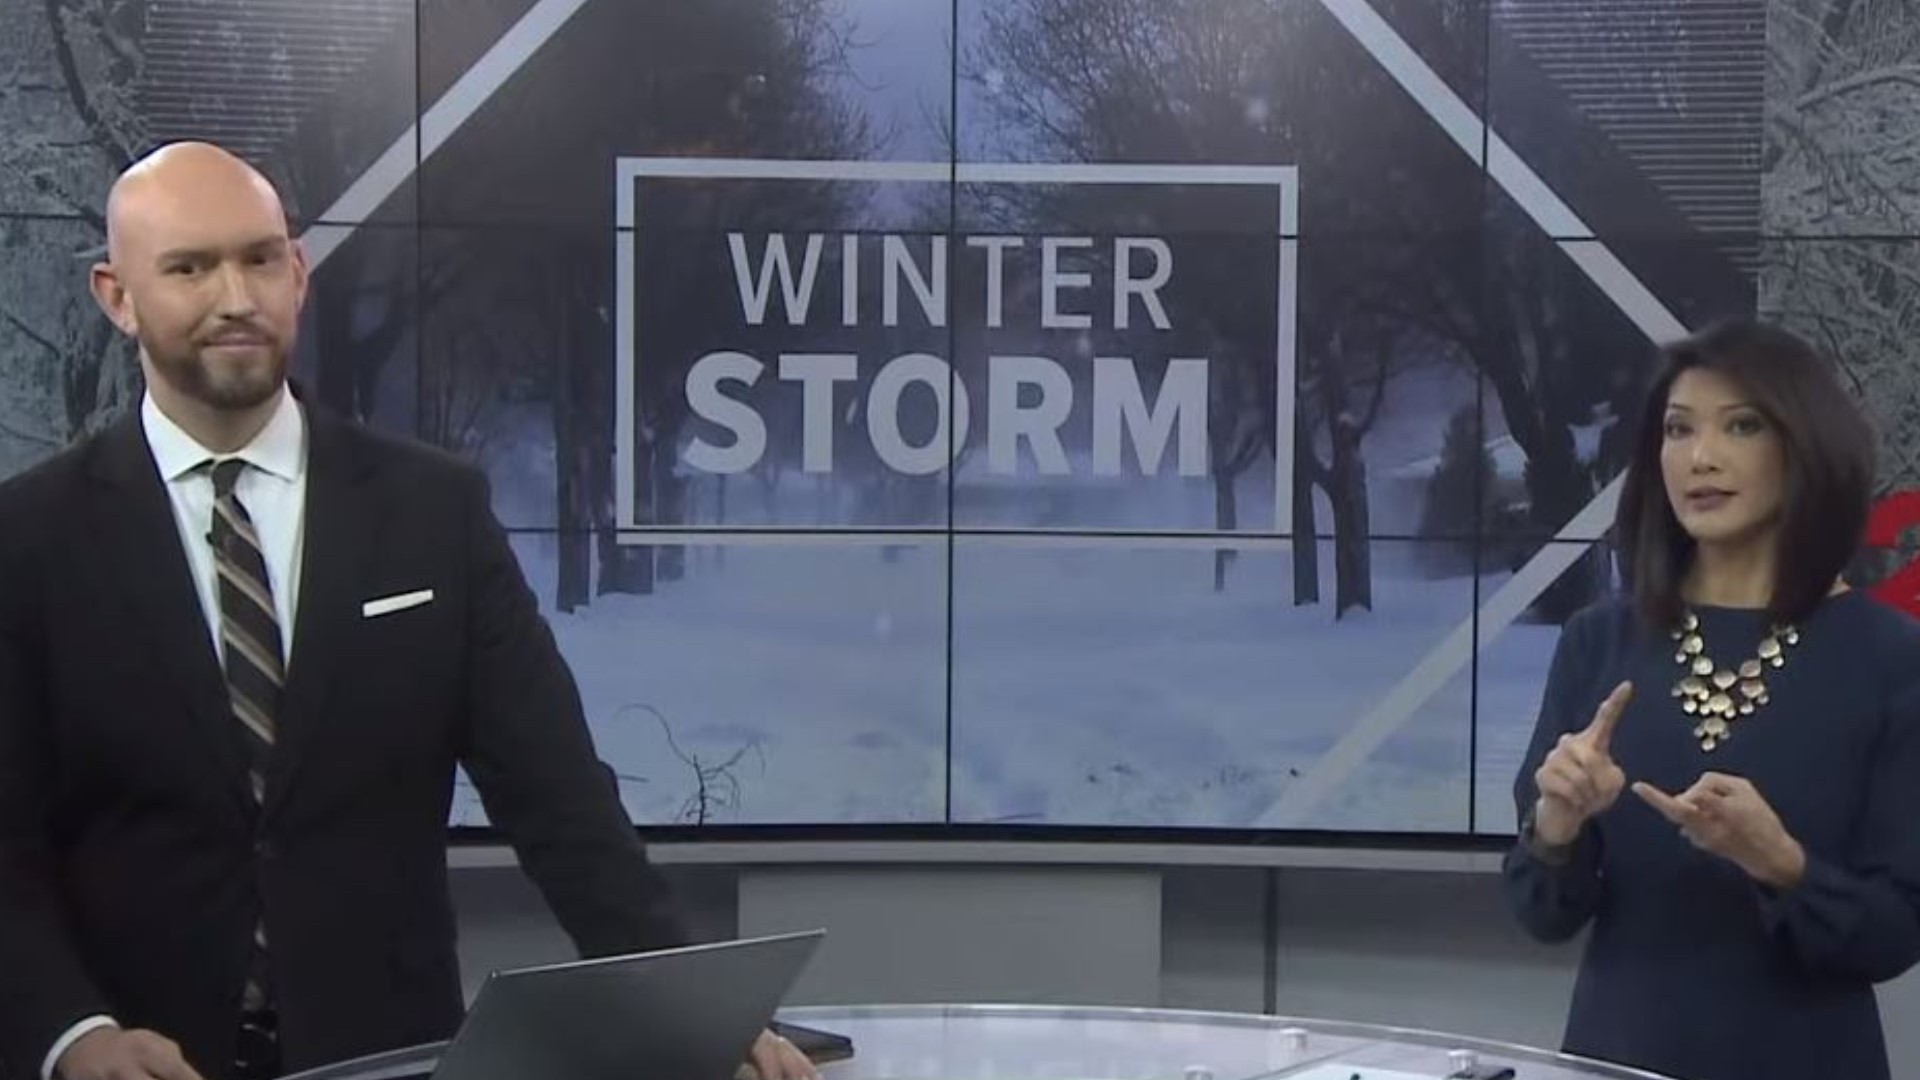 WFMY News 2's special winter storm coverage.